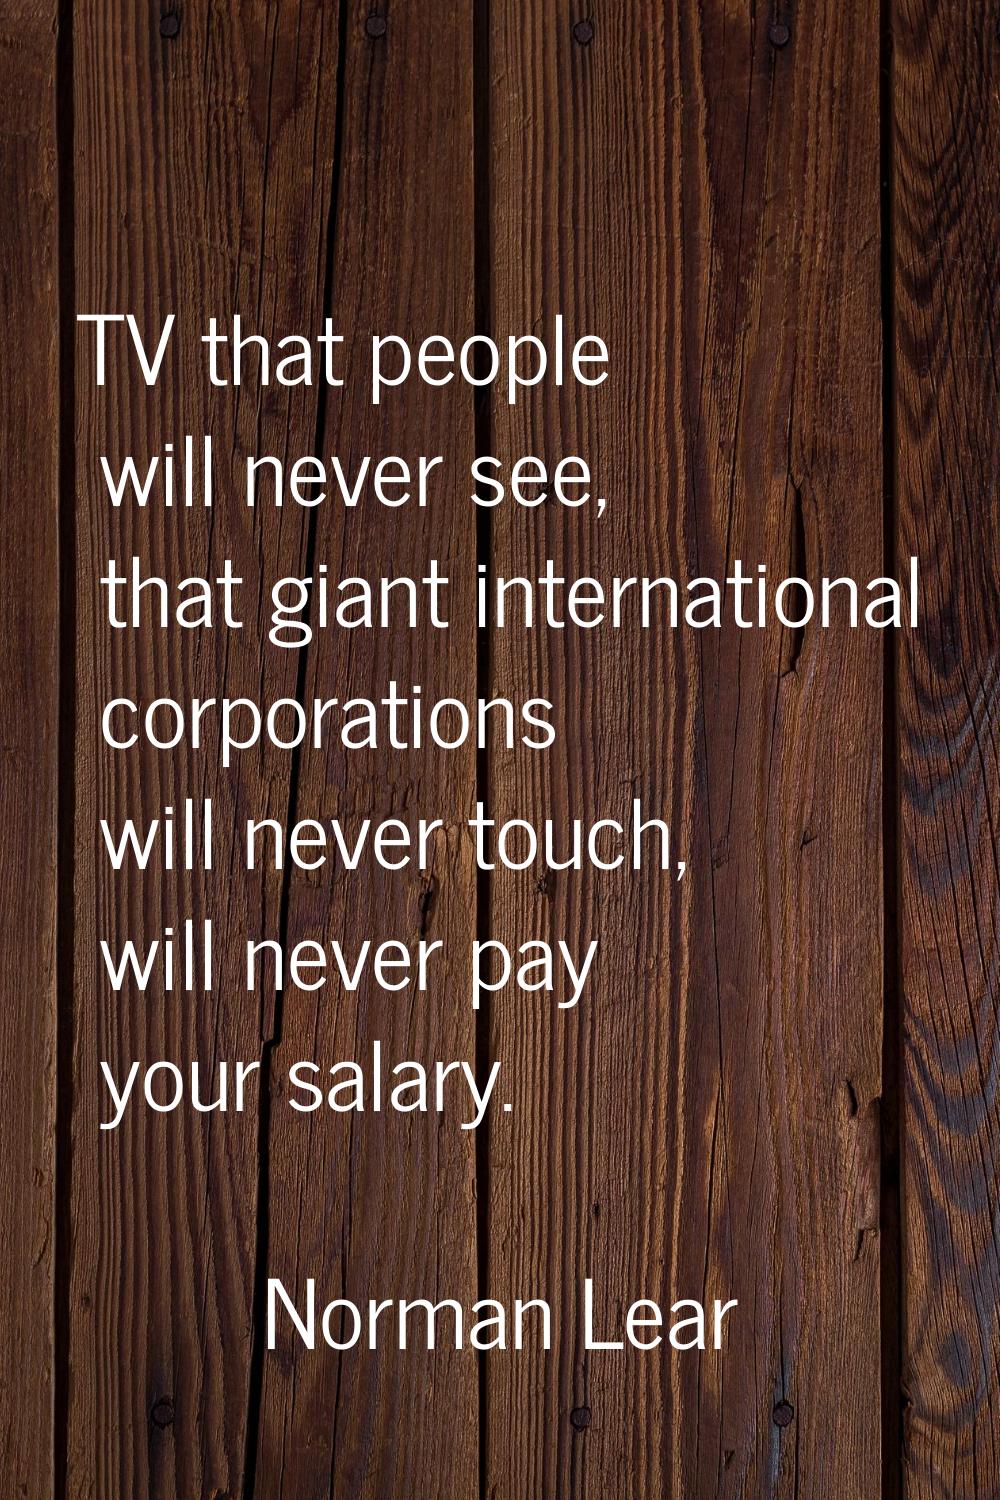 TV that people will never see, that giant international corporations will never touch, will never p